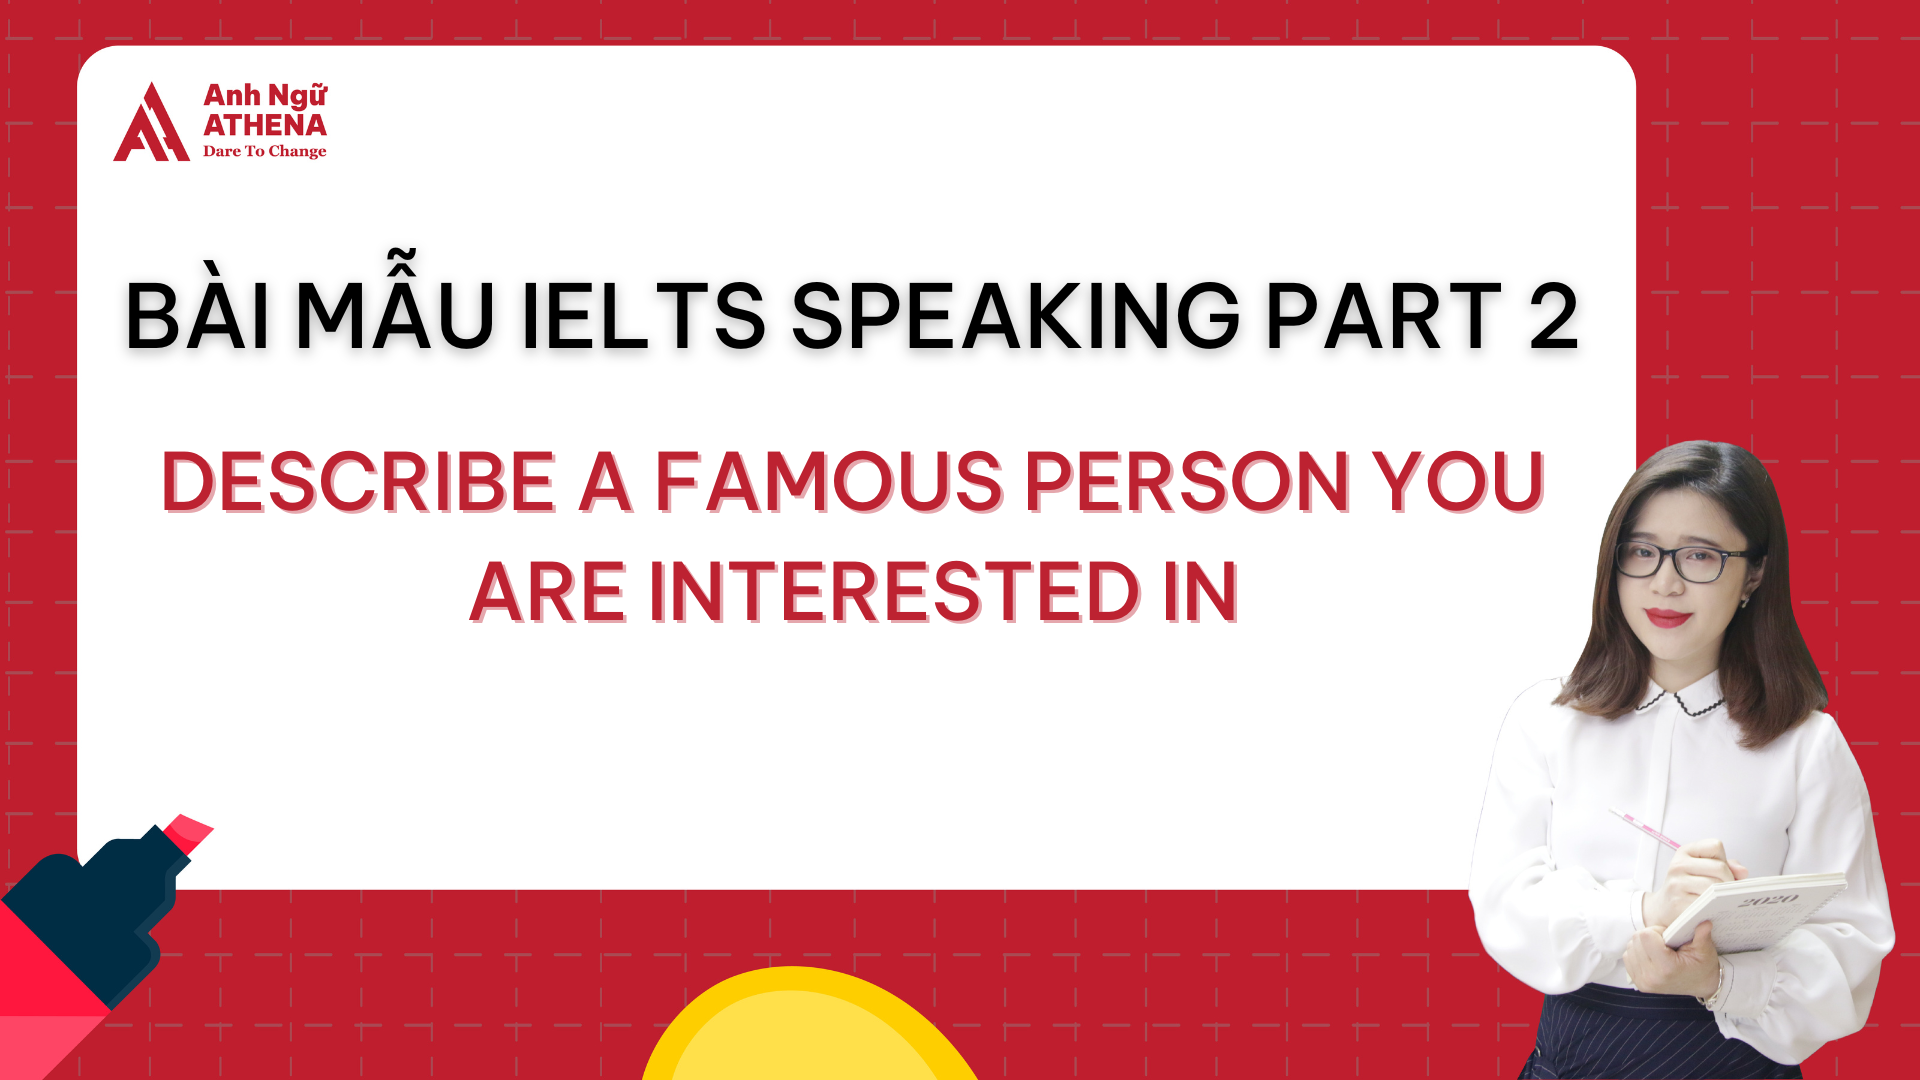 Bài mẫu IELTS Speaking Part 2 - Topic: Describe a famous person you are interested in